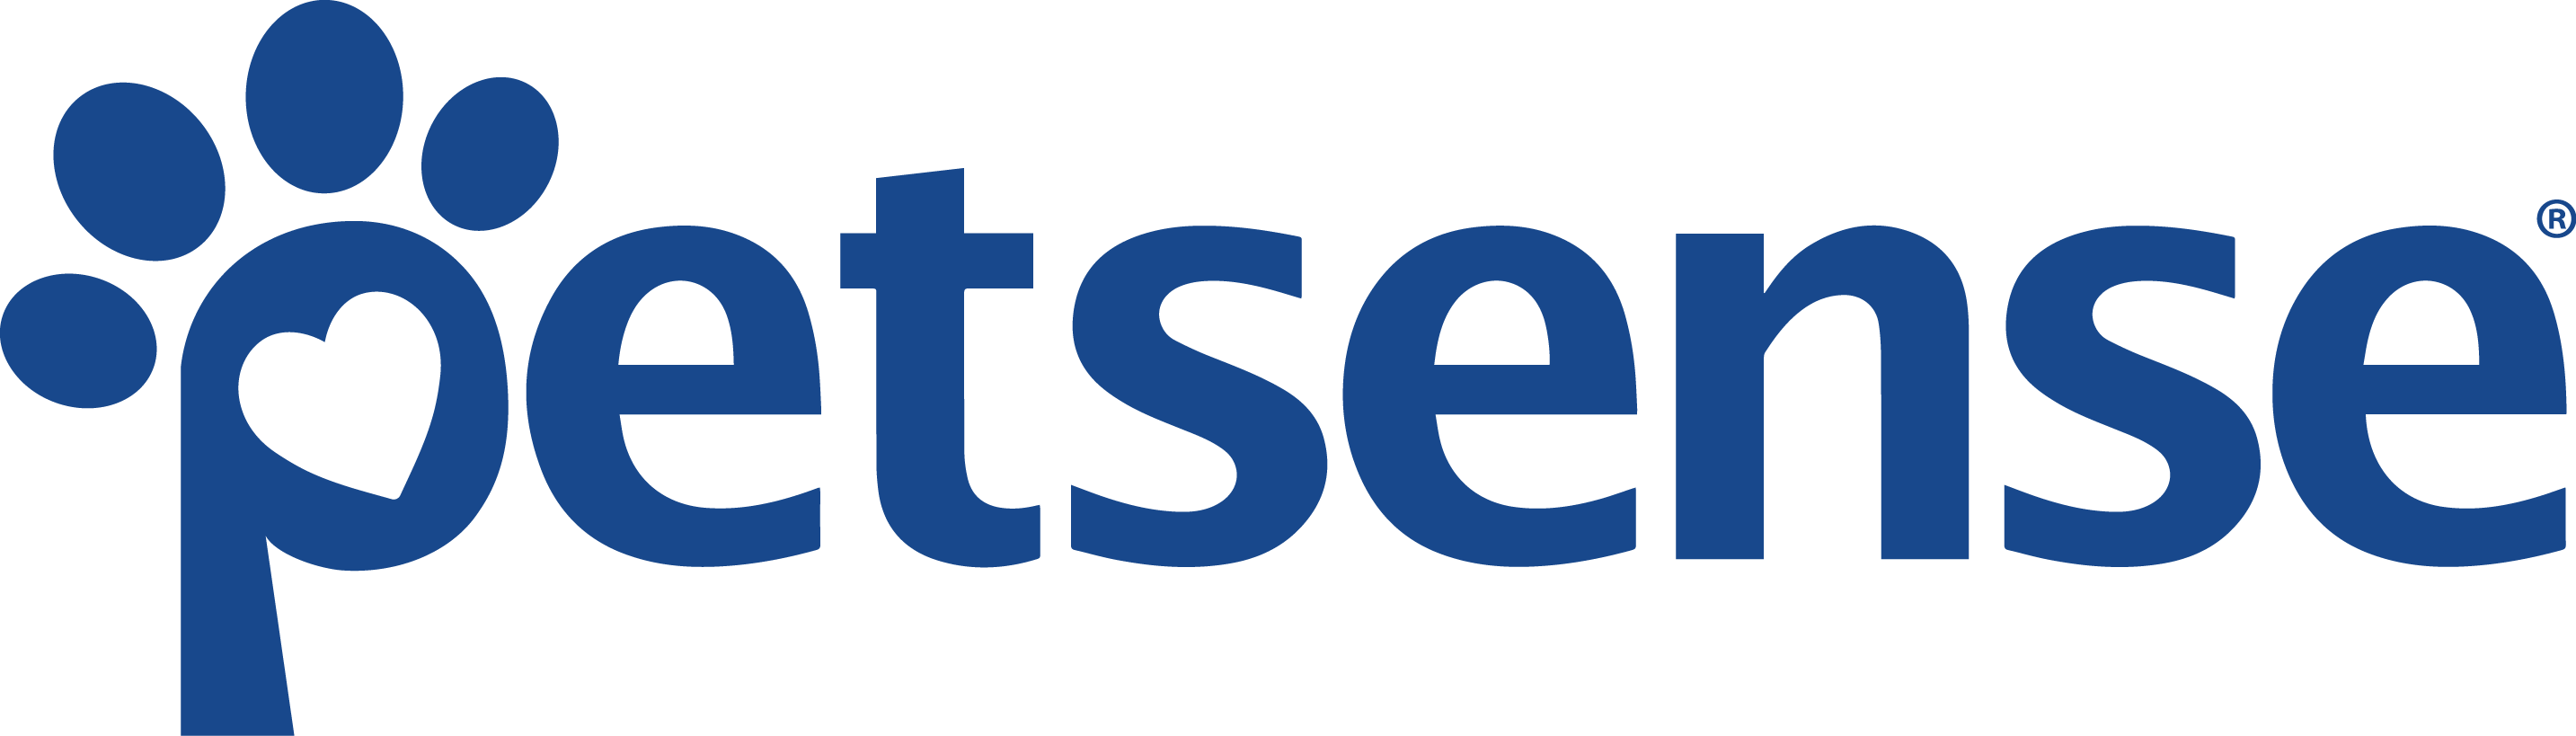 Petsense Donates More than 147,000 Pounds of Dog Food to Bessel Pet Foundation